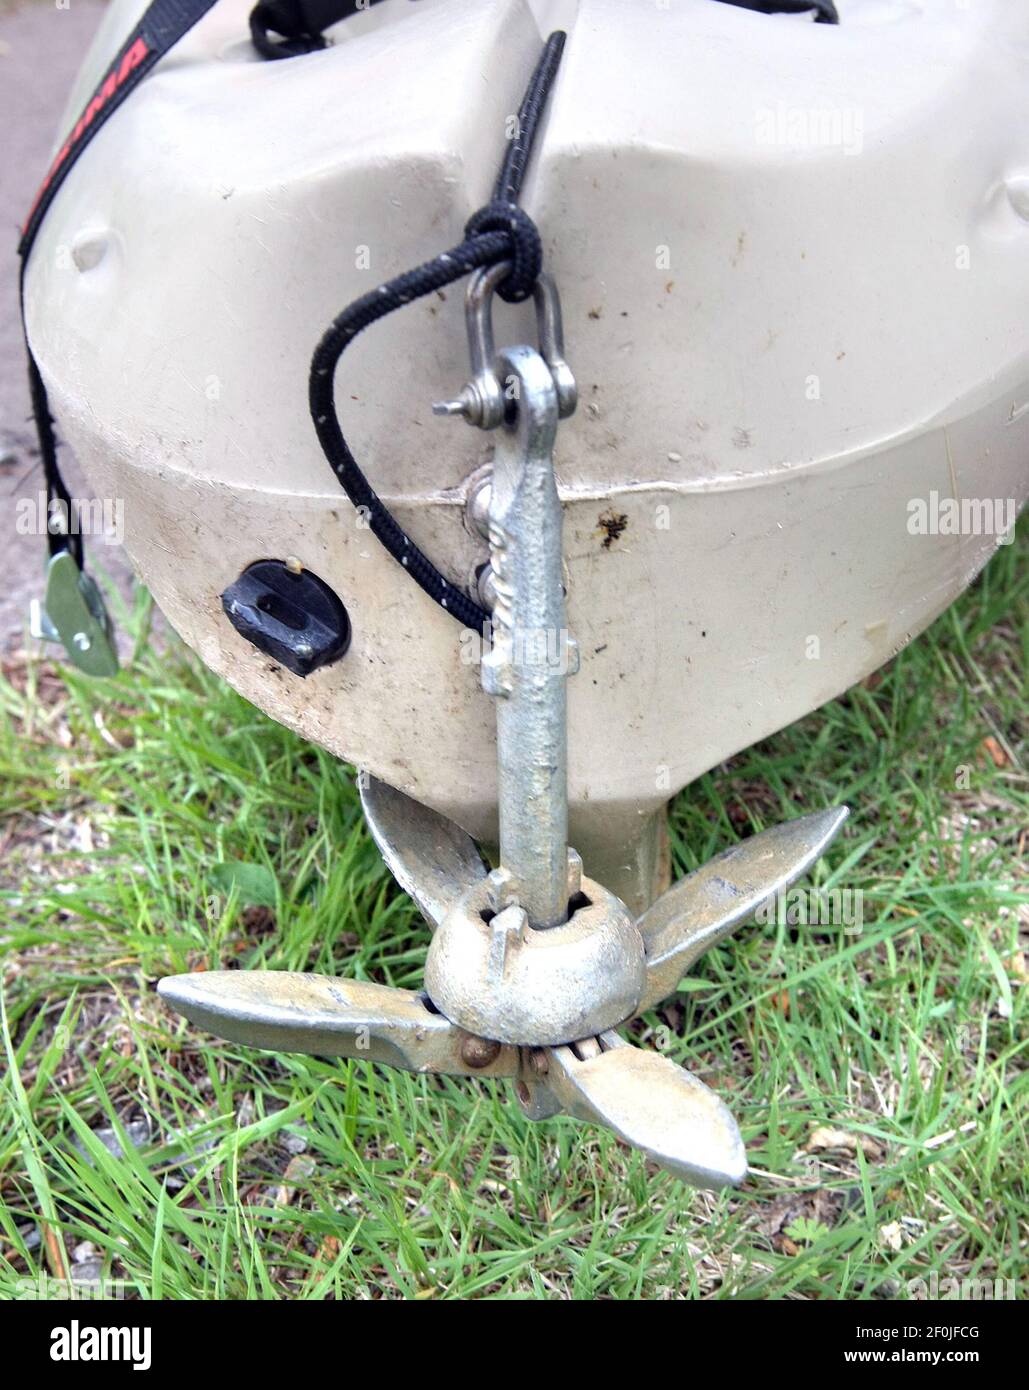 https://c8.alamy.com/comp/2F0JFCG/forrest-rieder-of-superior-wisconsin-uses-a-retractable-anchor-to-secure-his-kayak-while-fishing-photo-by-bob-kingduluth-news-tribunemctsipa-usa-2F0JFCG.jpg